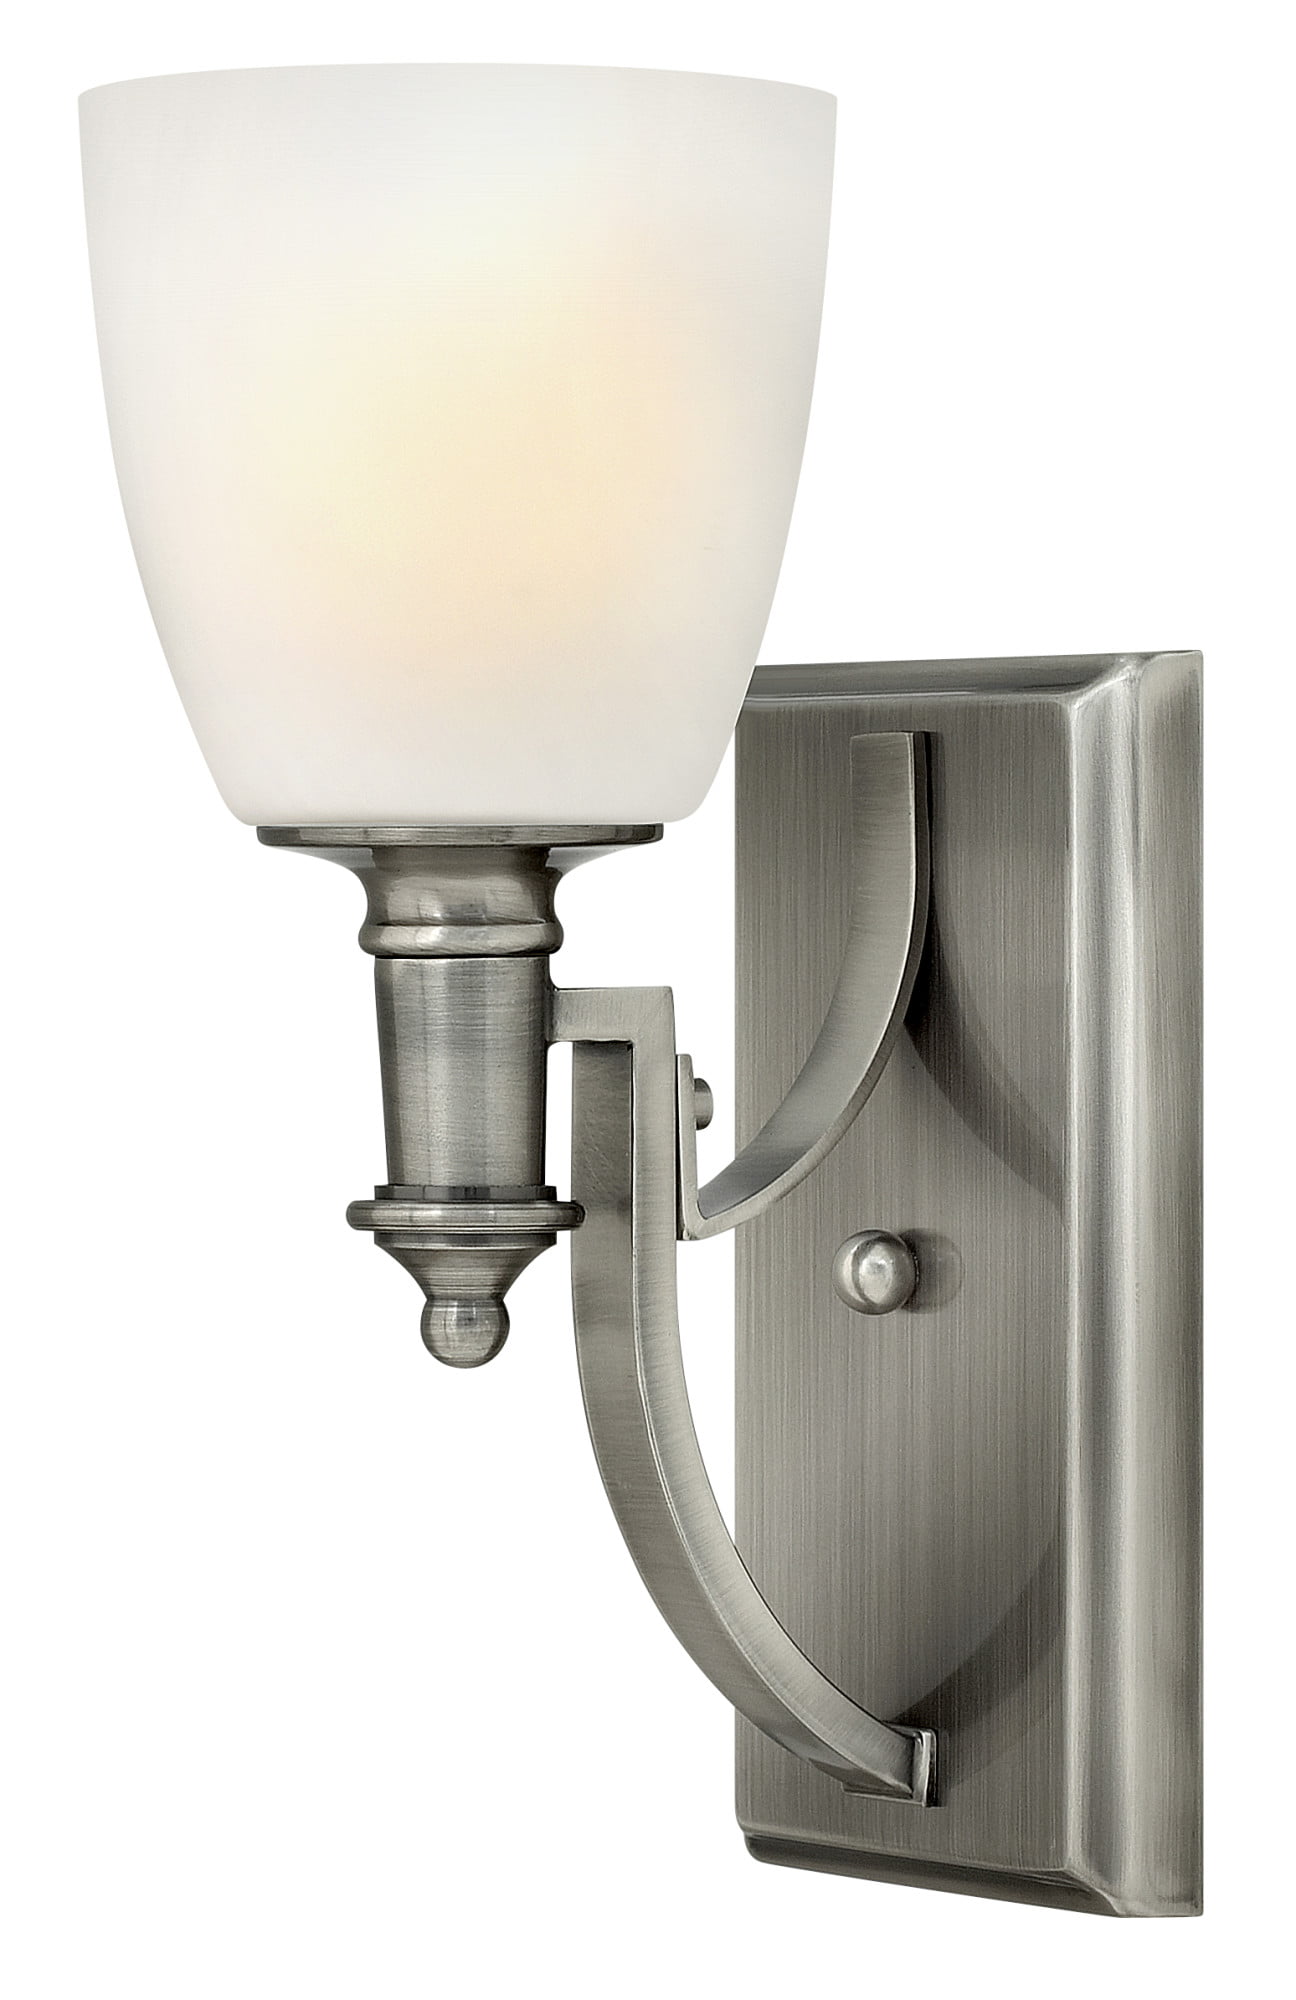 Hinkley Lighting Polished Antique Nickel And Etched Opal Glass Wall Sconce 